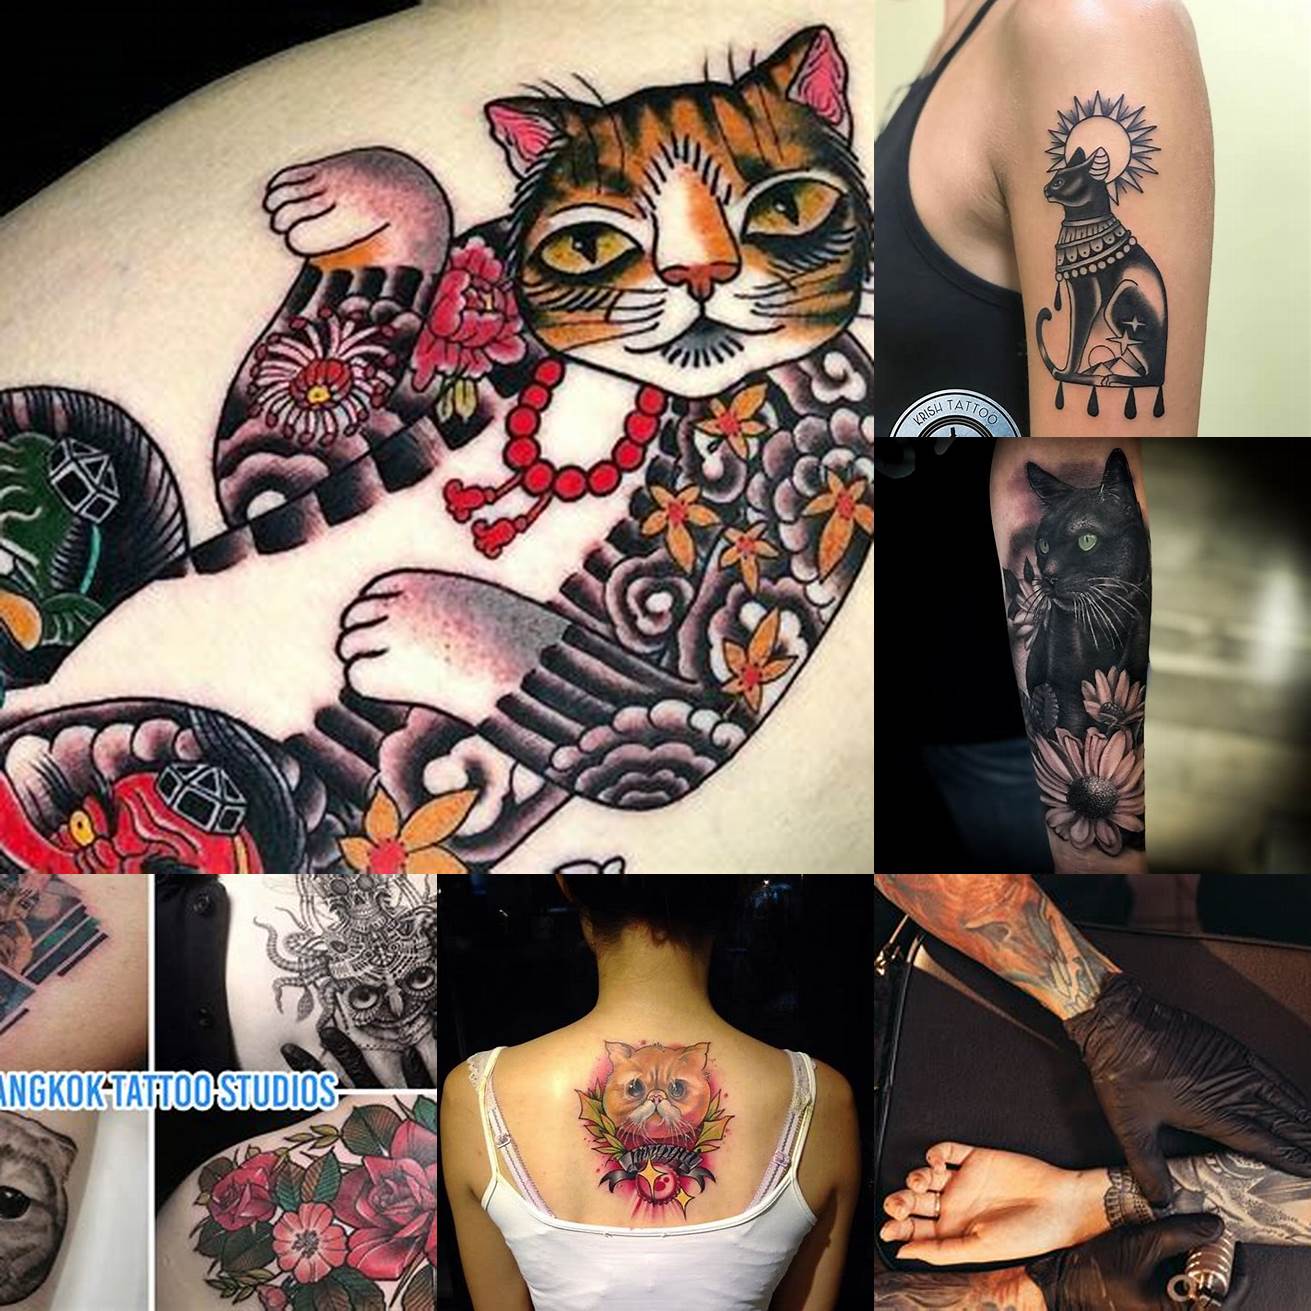 Find a reputable and experienced tattoo artist